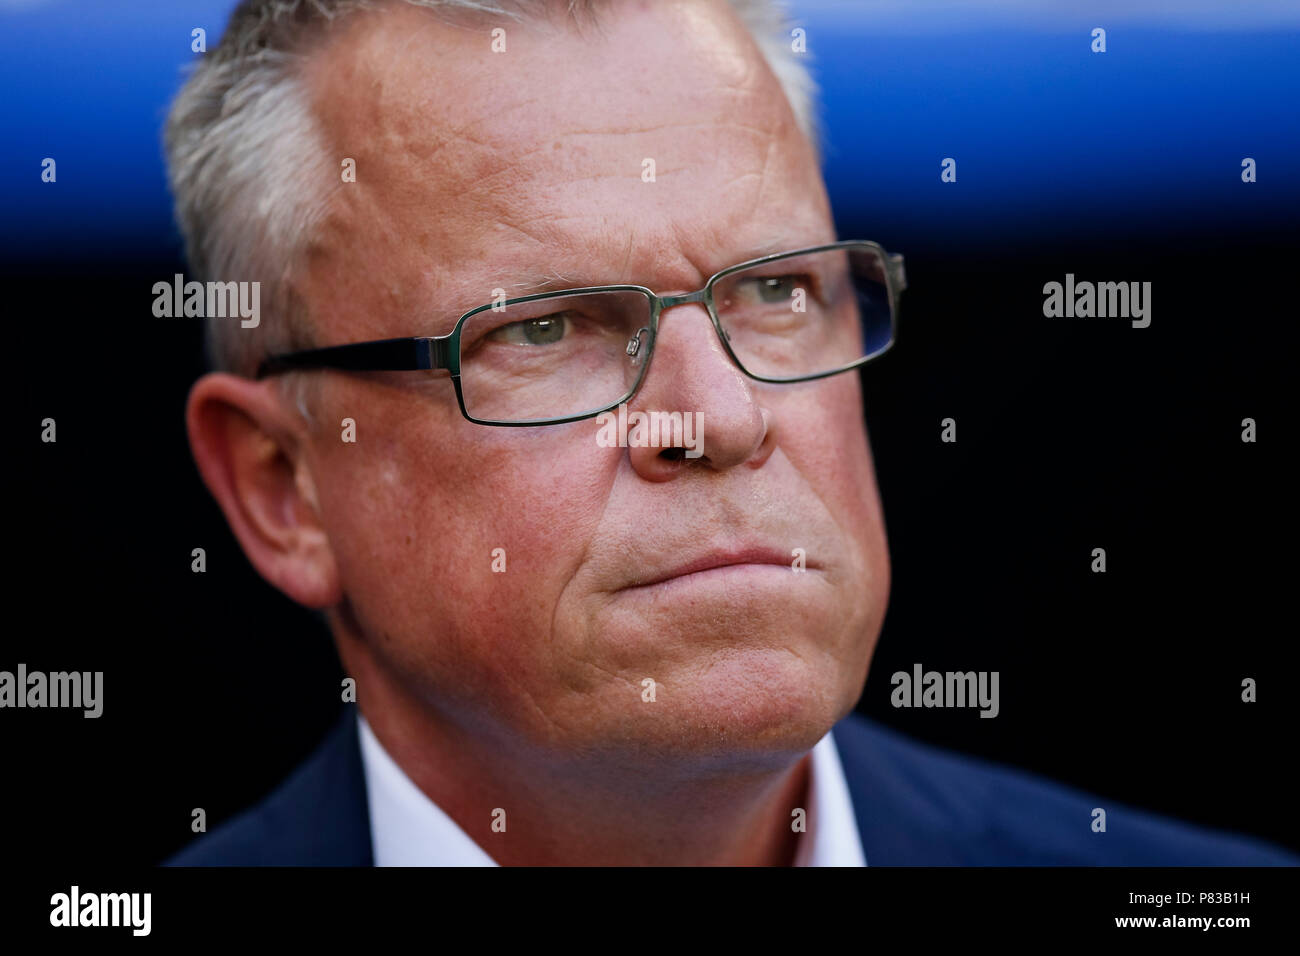 Samara, Russia. 7th July, 2018. Sweden Manager Janne Andersson during the 2018 FIFA World Cup Quarter Final match between Sweden and England at Samara Arena on July 7th 2018 in Samara, Russia. (Photo by Daniel Chesterton/phcimages.com) Credit: PHC Images/Alamy Live News Stock Photo